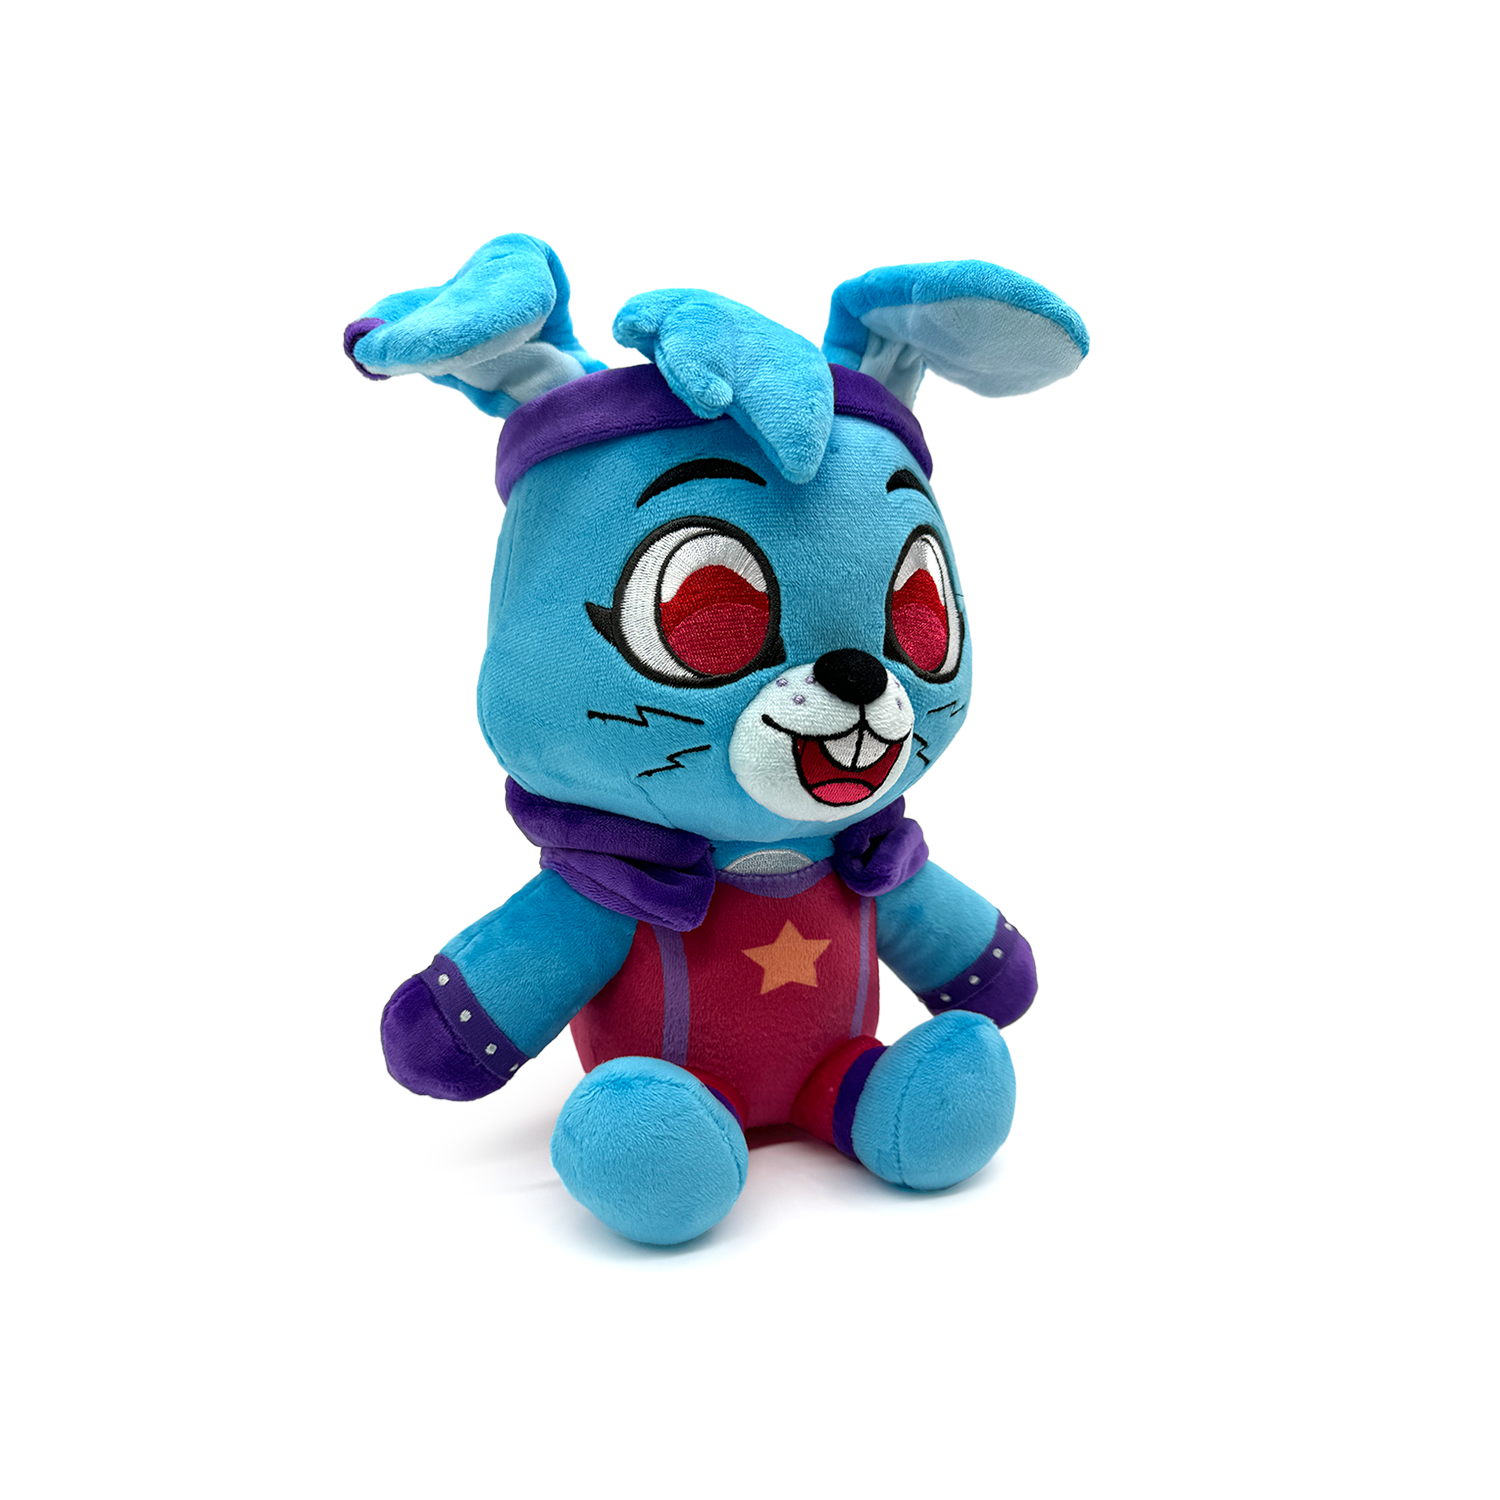 What Happened to Glamrock Bonnie? All About Glamrock Bonnie FNAF